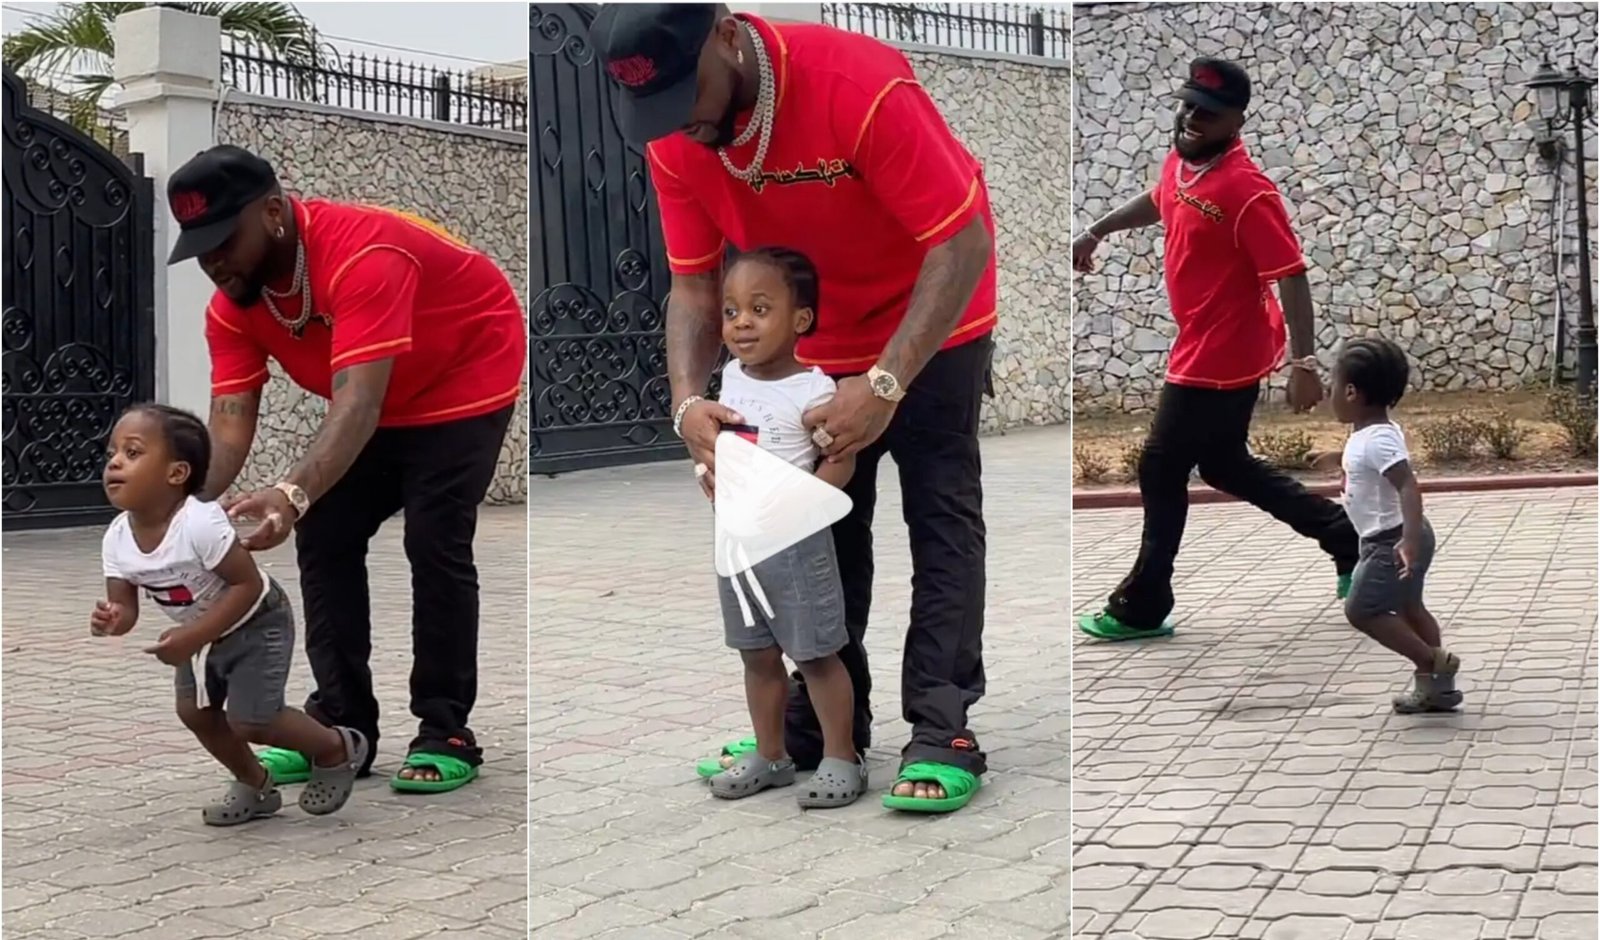 “Tell the Olympics my son is coming” - Davido says as he brags about his son Ifeanyi's running skill (video)